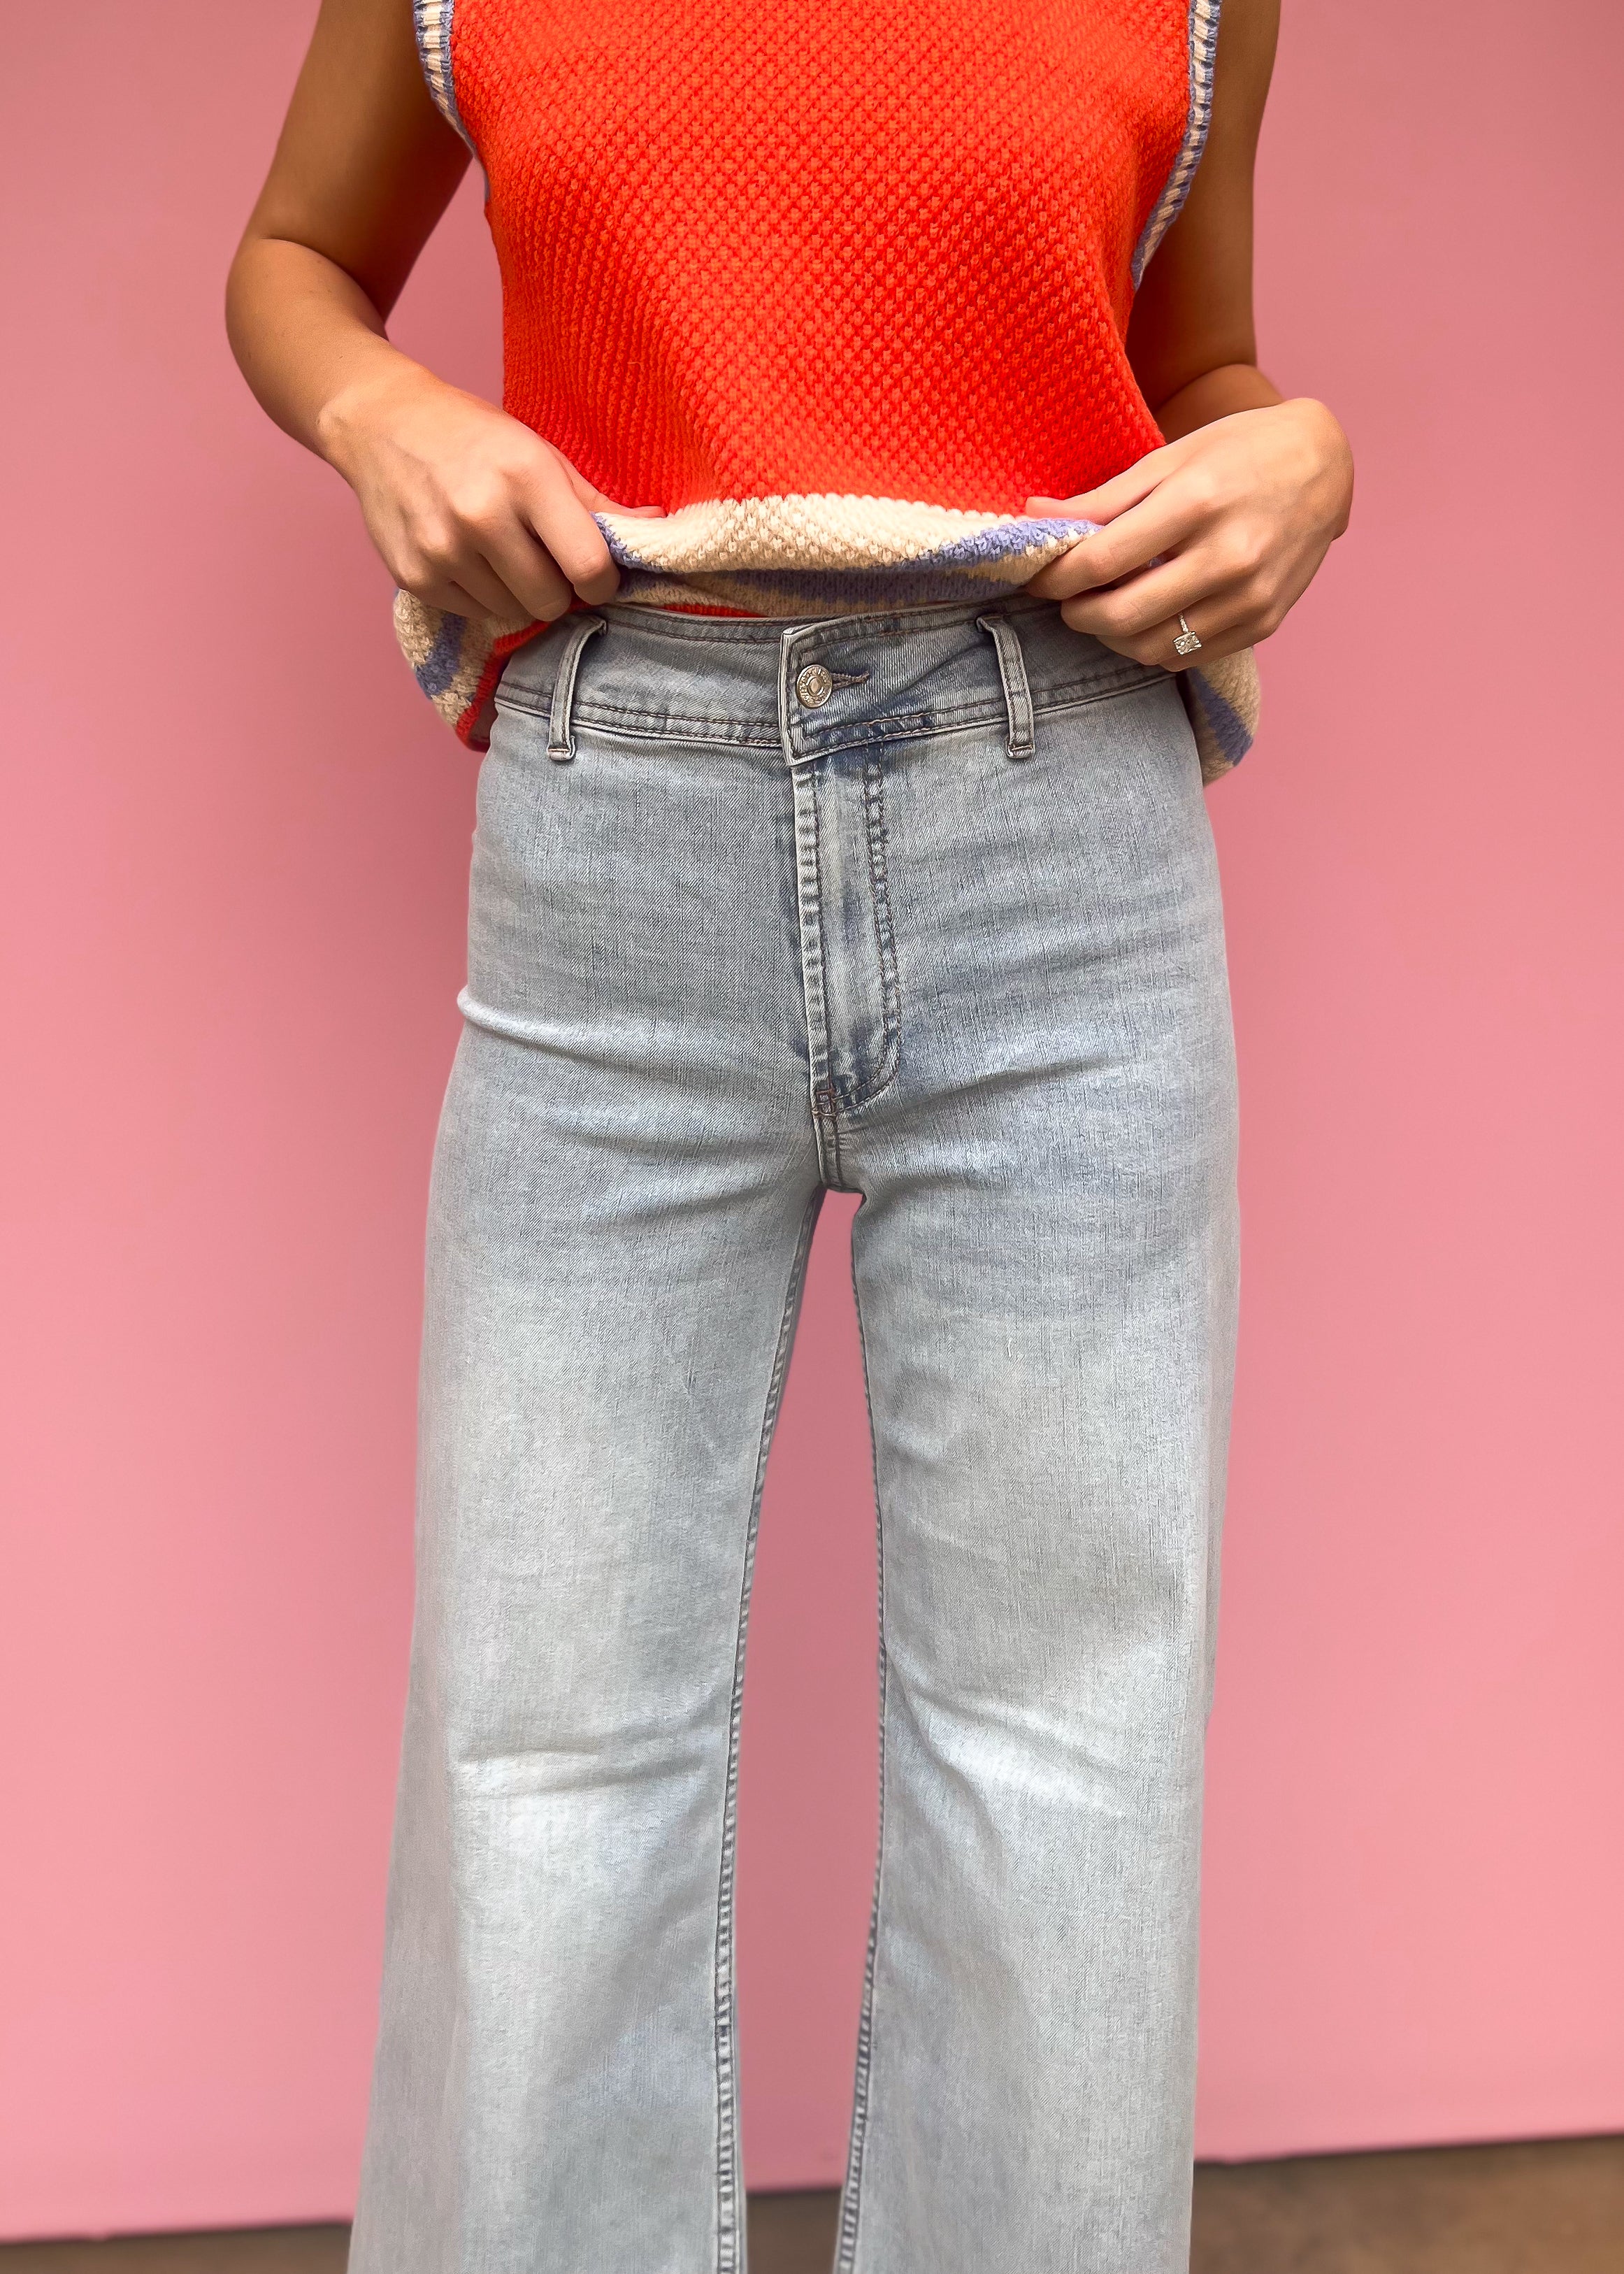 Articles of Society: Carine High Rise Relaxed Jean